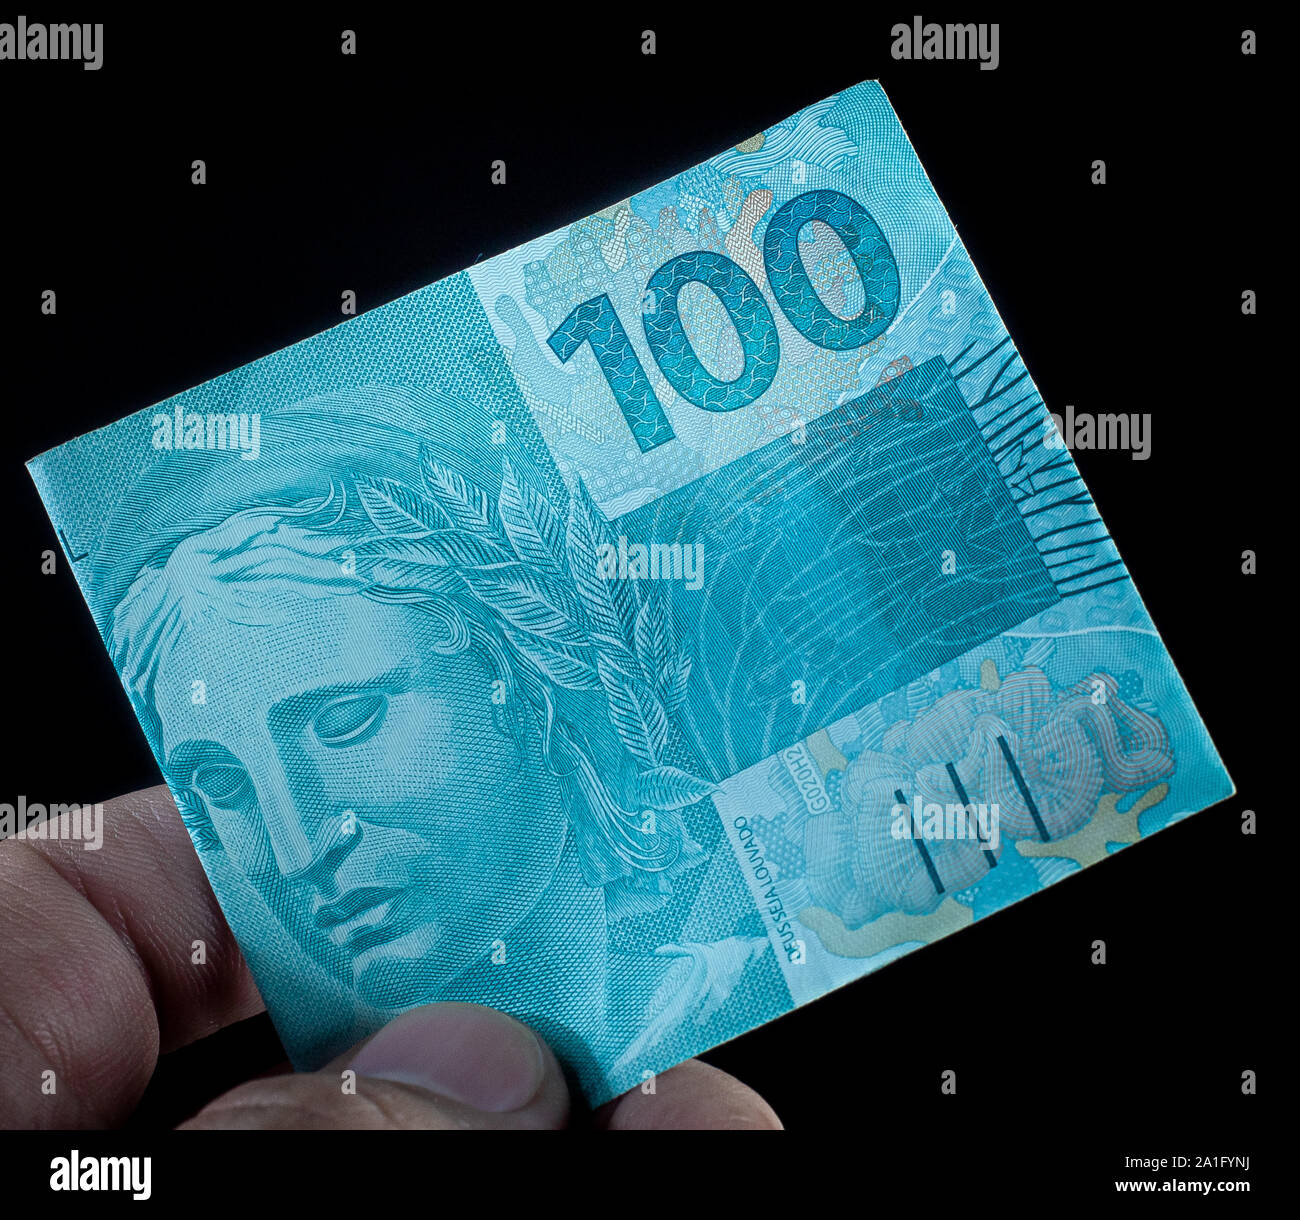 Real, Brazilian Currency. Photo of a one hundred dollar bill. Stock Photo